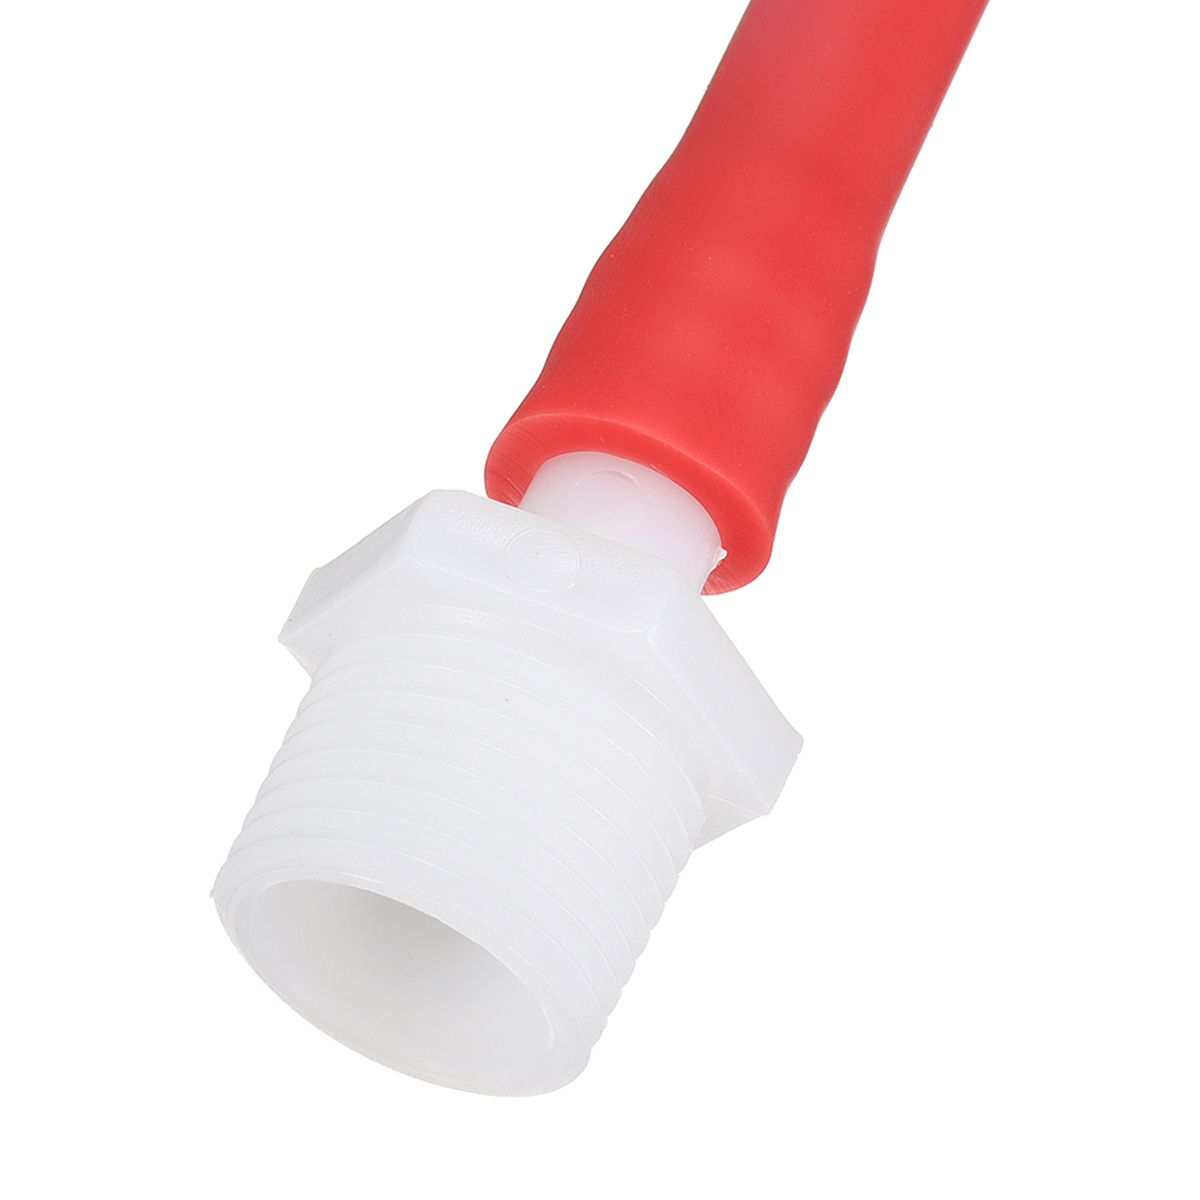 50100150cm-Long-Soft-Silicone-Comfort-Nozzle-Enema-Attachment-Tube-Pipe-Cleansing-Kit-1331097